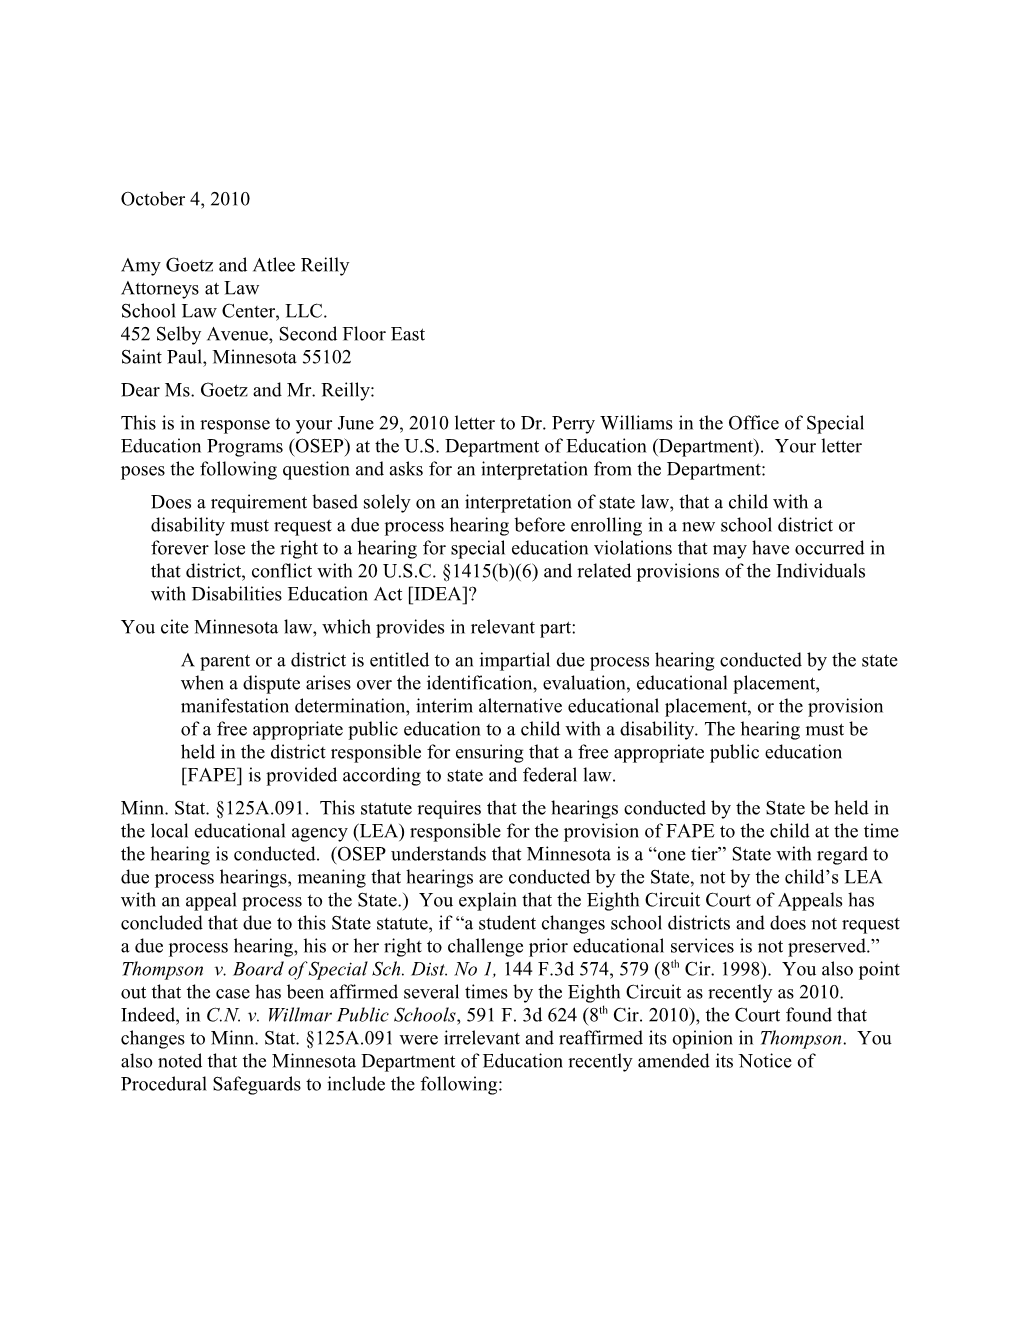 Goetz Reilly Letter Dated 10/04/10 Re: Impartial Due Process Hearings (Ms Word)